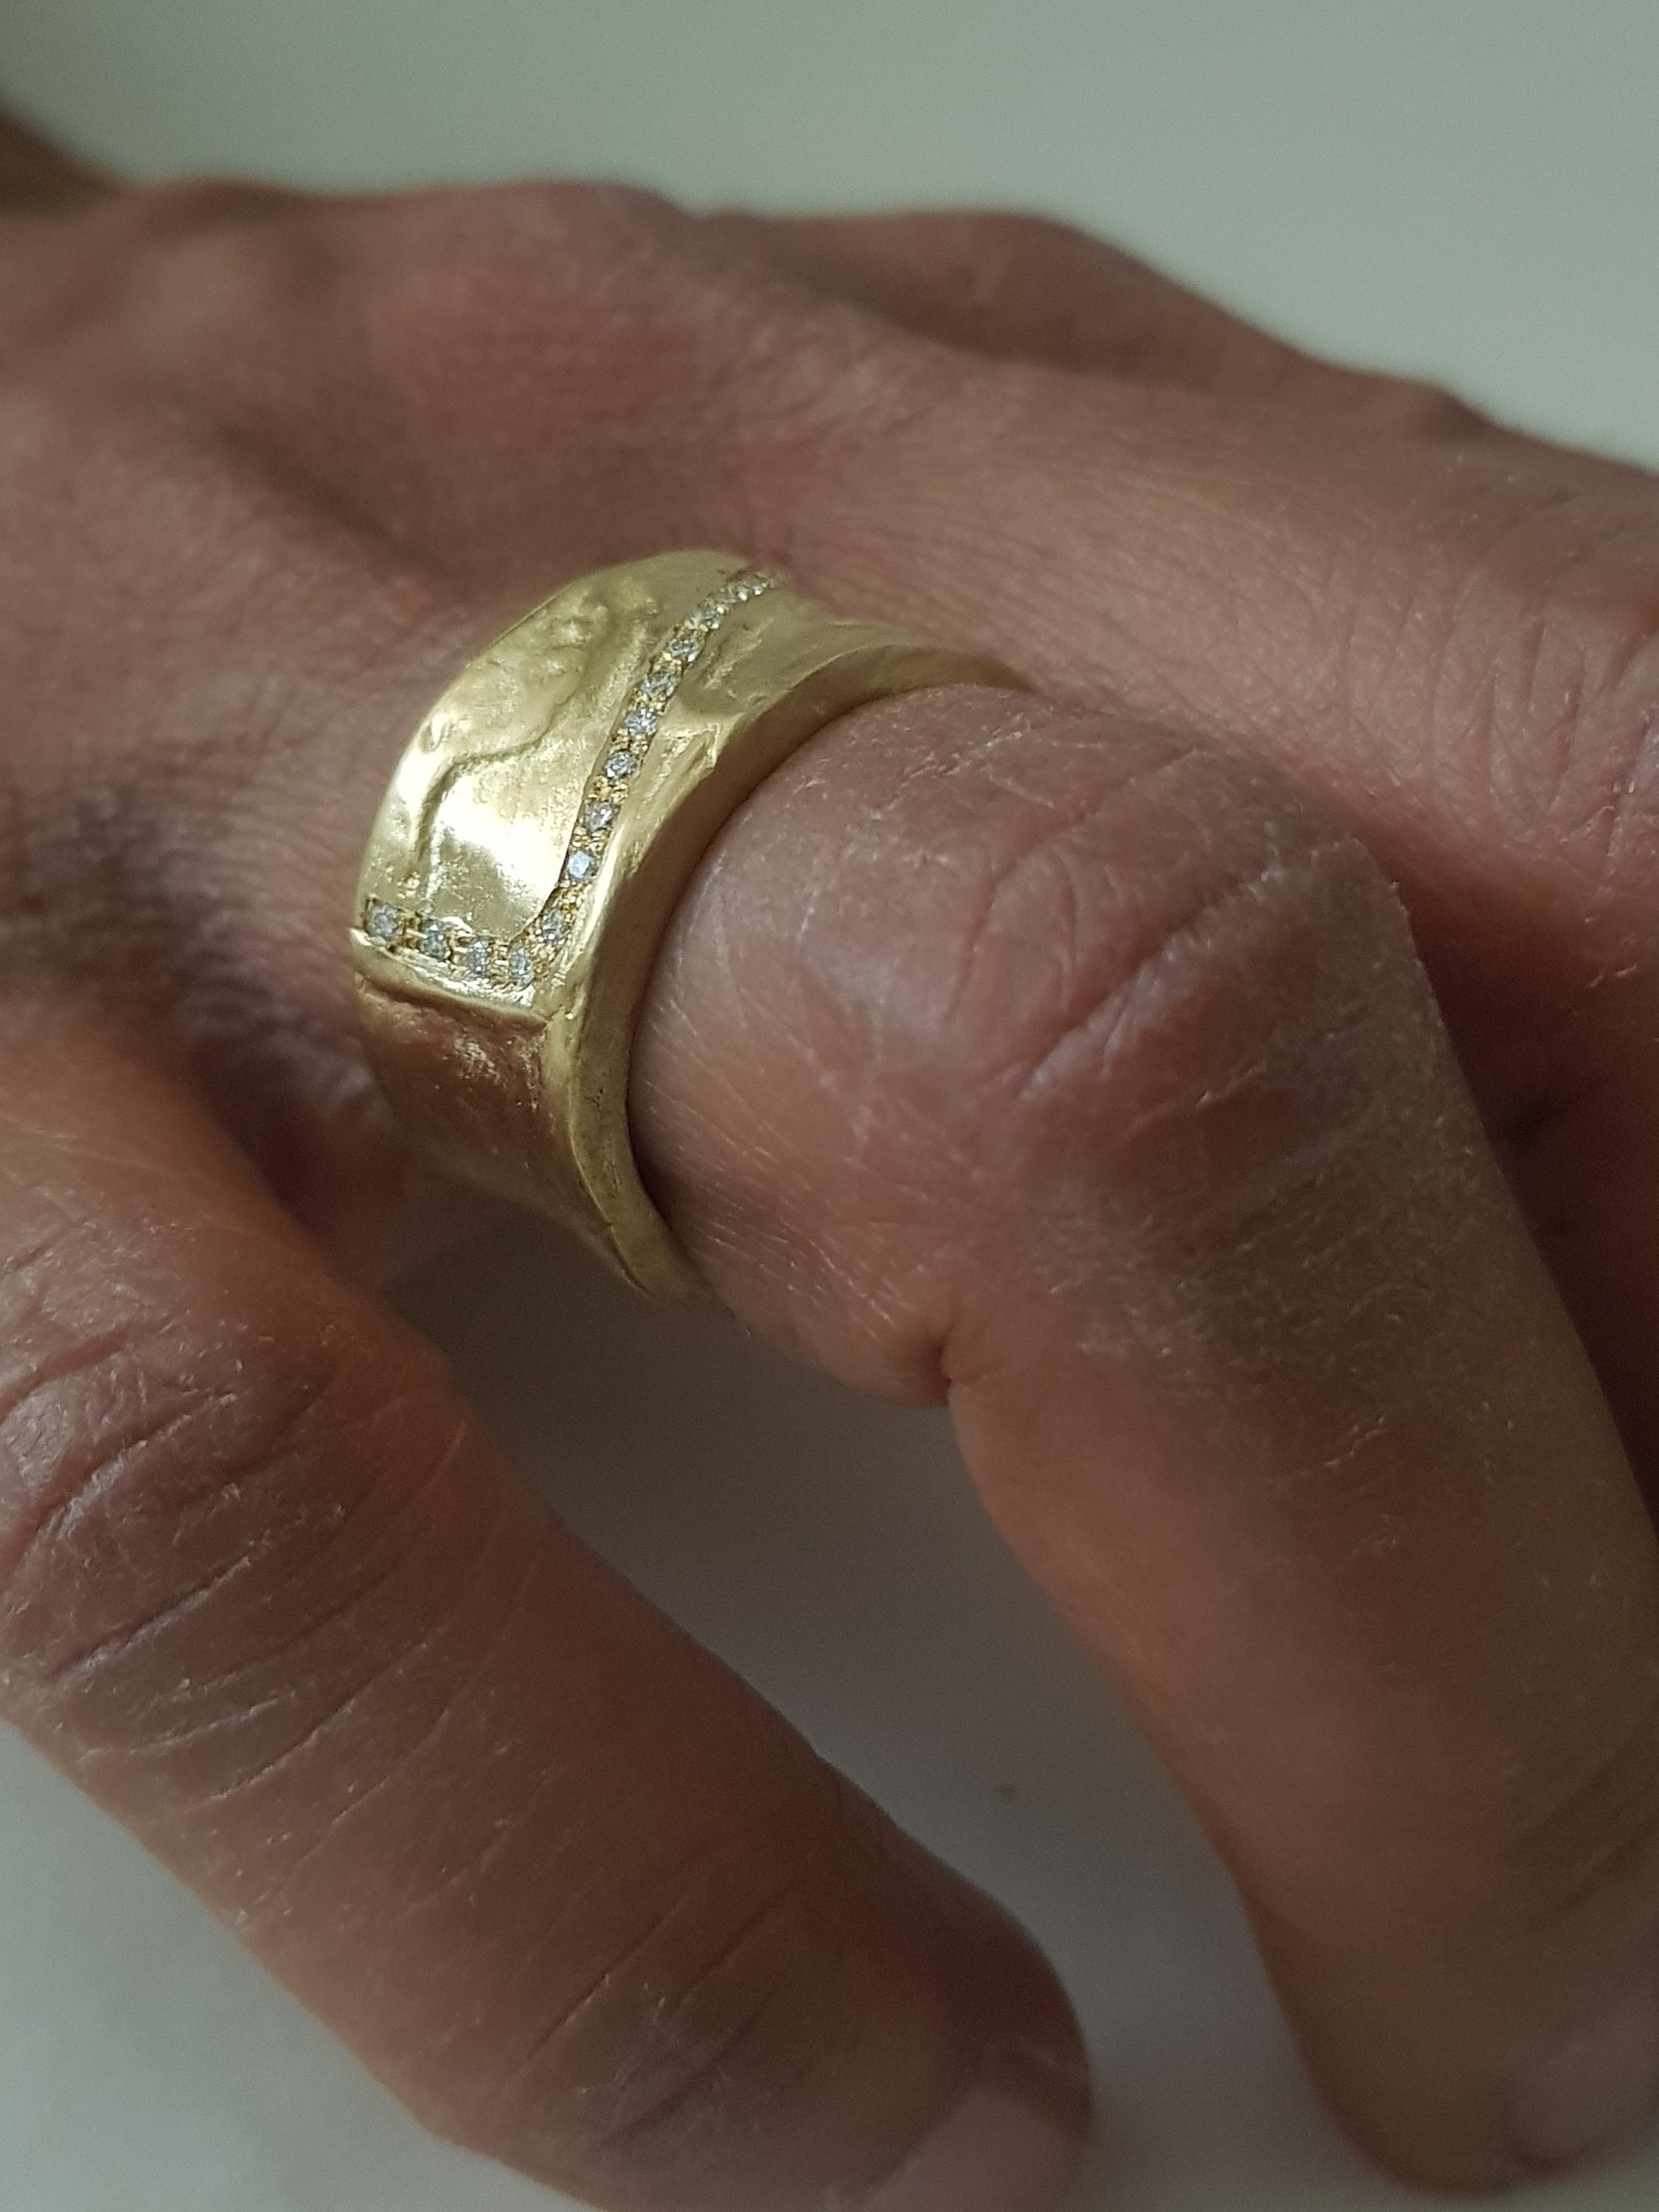 Is It Gold or Not? How To Tell If Your Jewelry Is Valuable Or Fake?